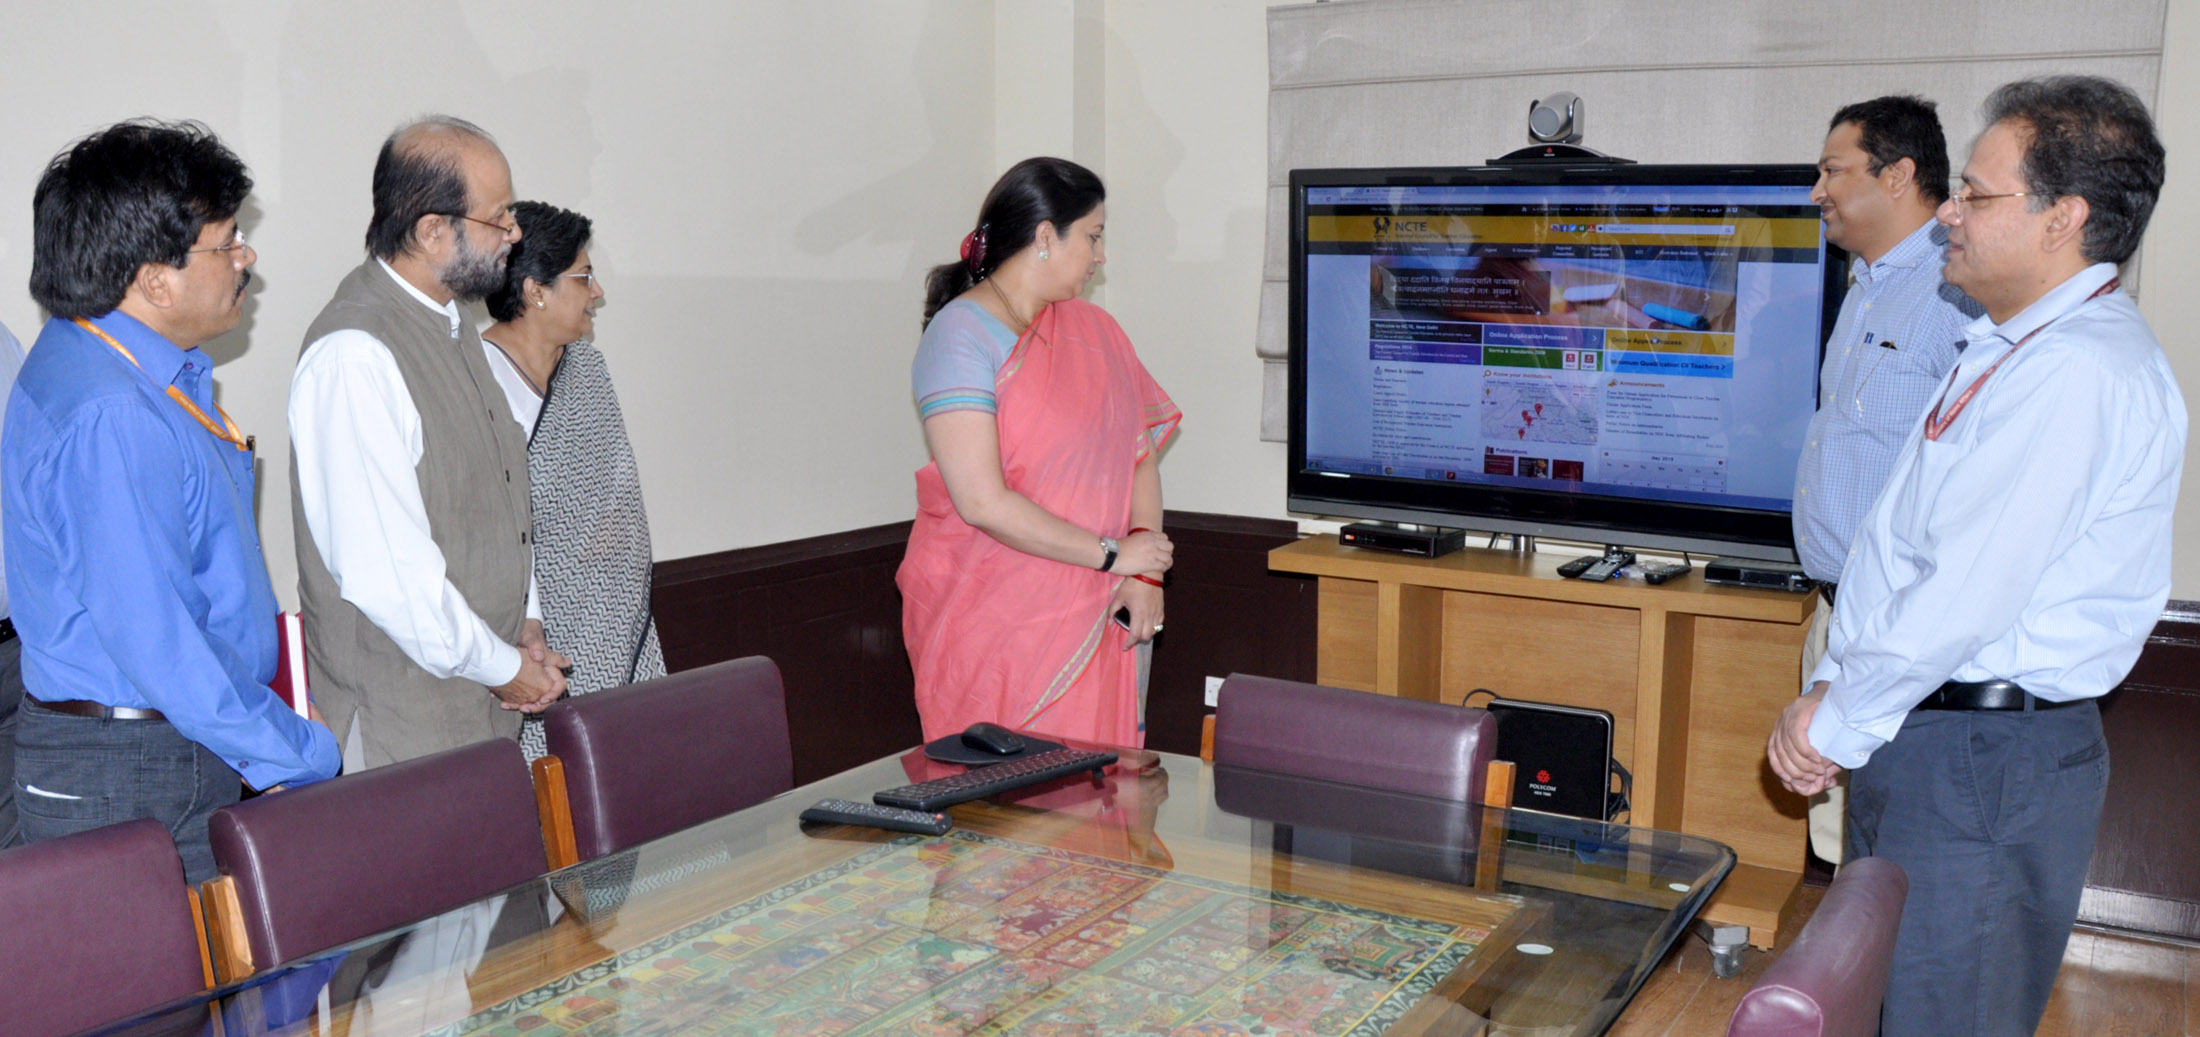 The Union Minister for Human Resource Development, Smt. Smriti Irani launching the new and revamped website of the National Council for Teacher Education’s (NCTE), in New Delhi on May 28, 2015.